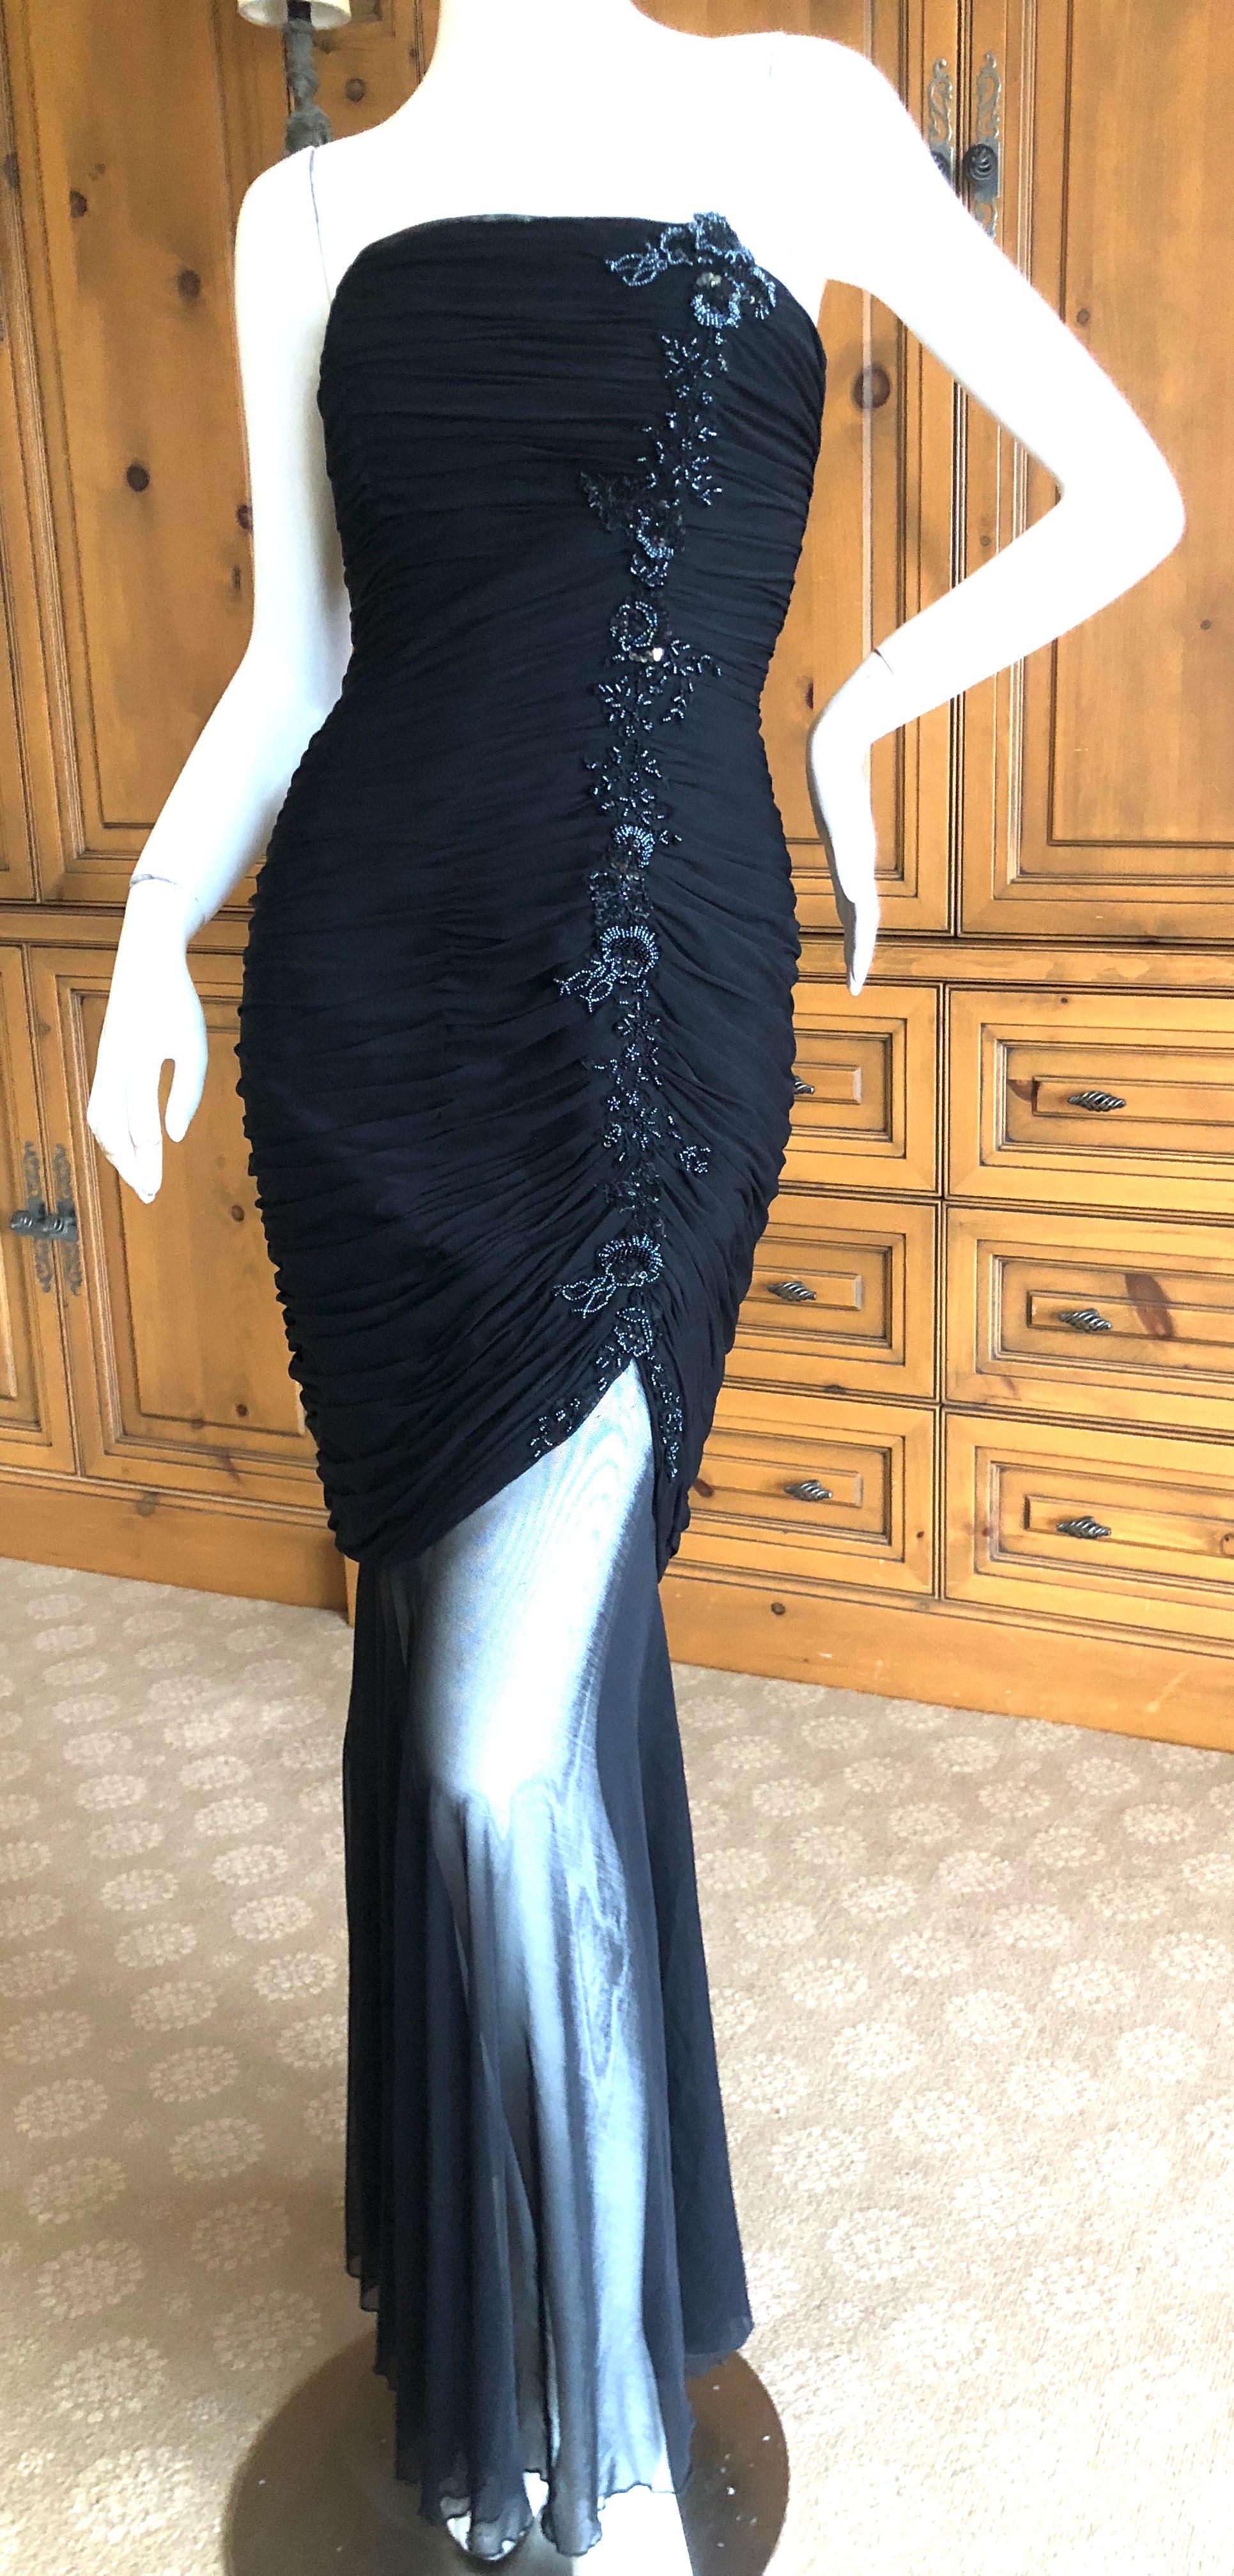 Vicky Tiel Couture Paris for Neiman Marcus Shirred Strapless Black Beaded Evening Dress.
Exquisite black dress with beading down the side front , sheer at the bottom.
The witty quote was 